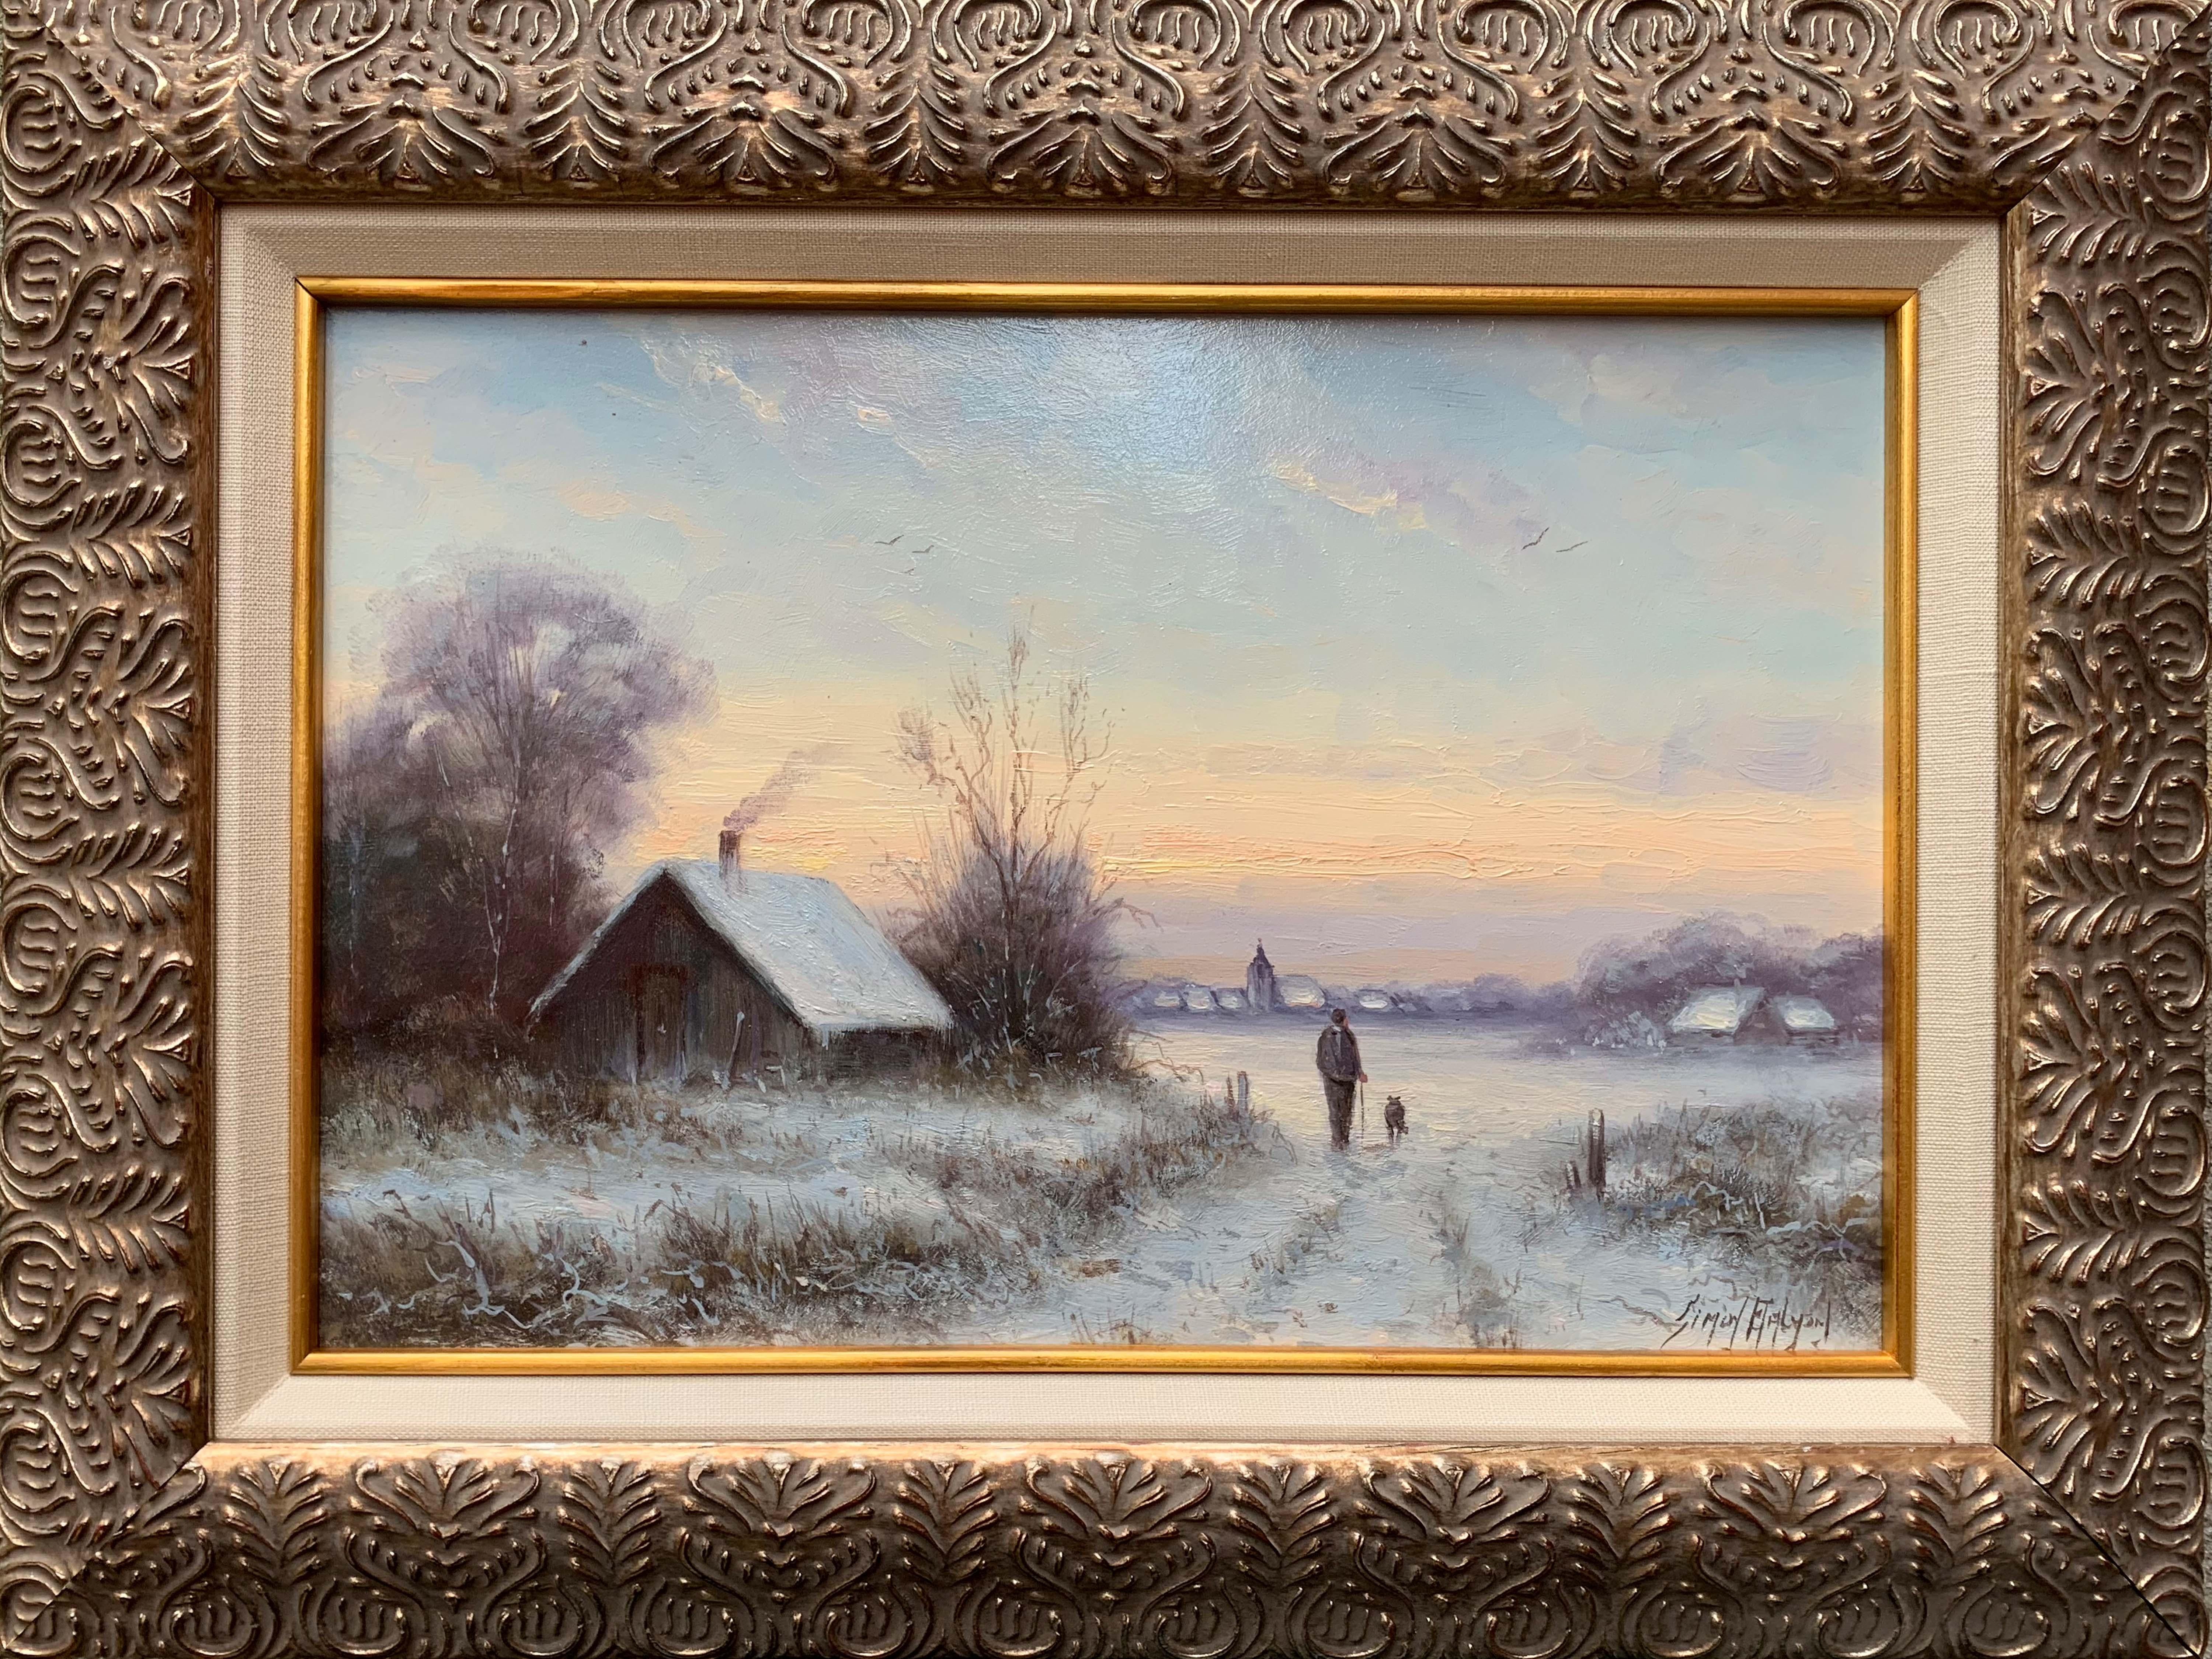 Sunset Winter - Painting by Simon Balyon